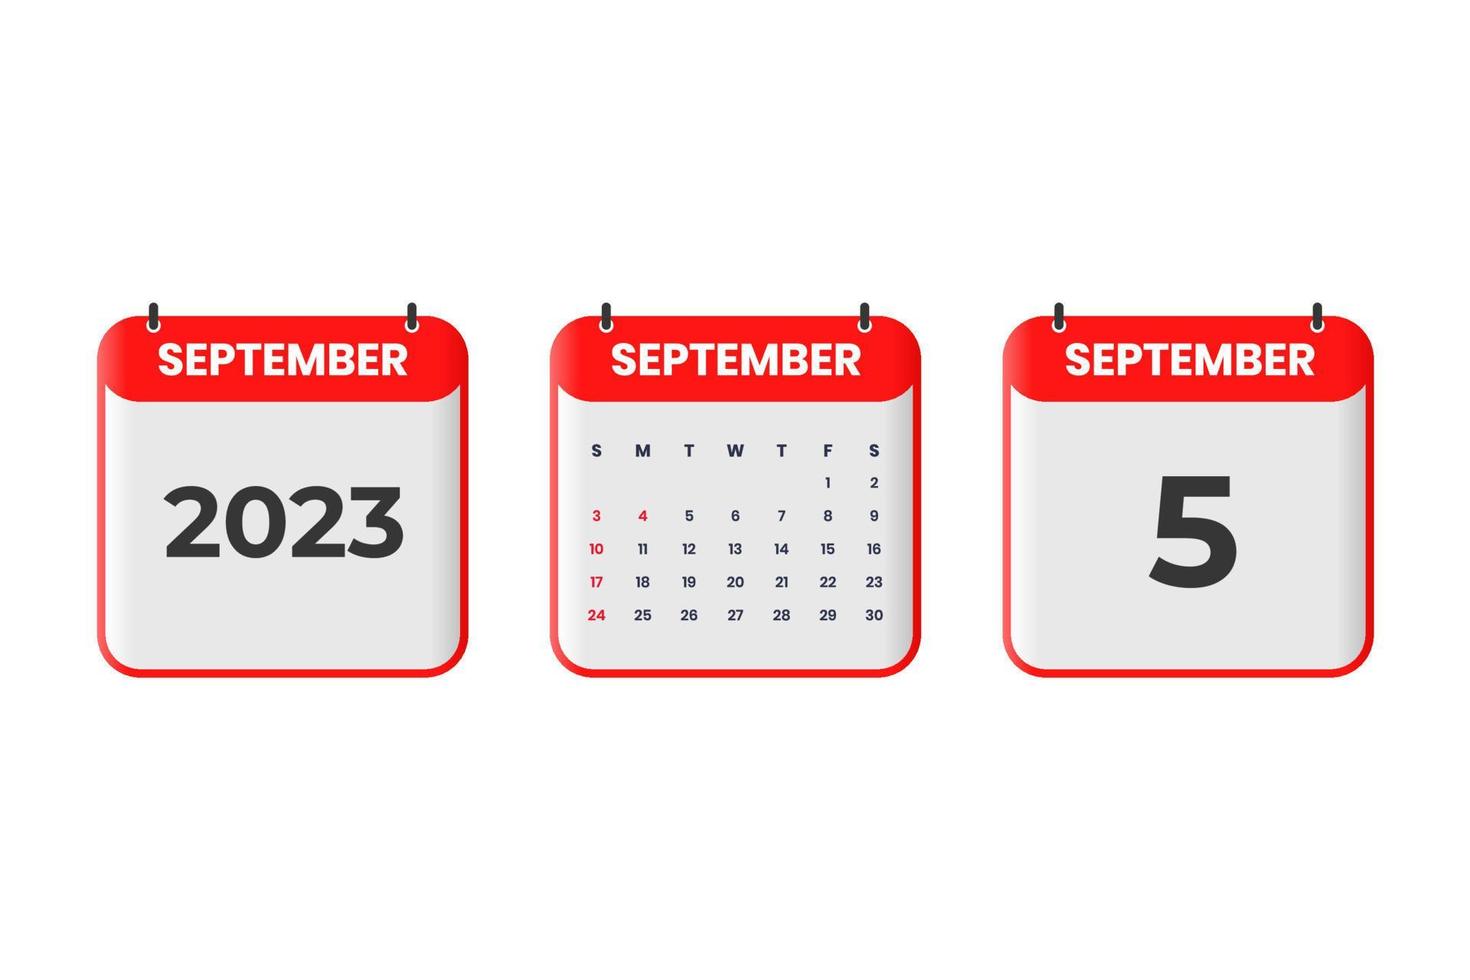 September 2023 calendar design. 5th September 2023 calendar icon for schedule, appointment, important date concept vector